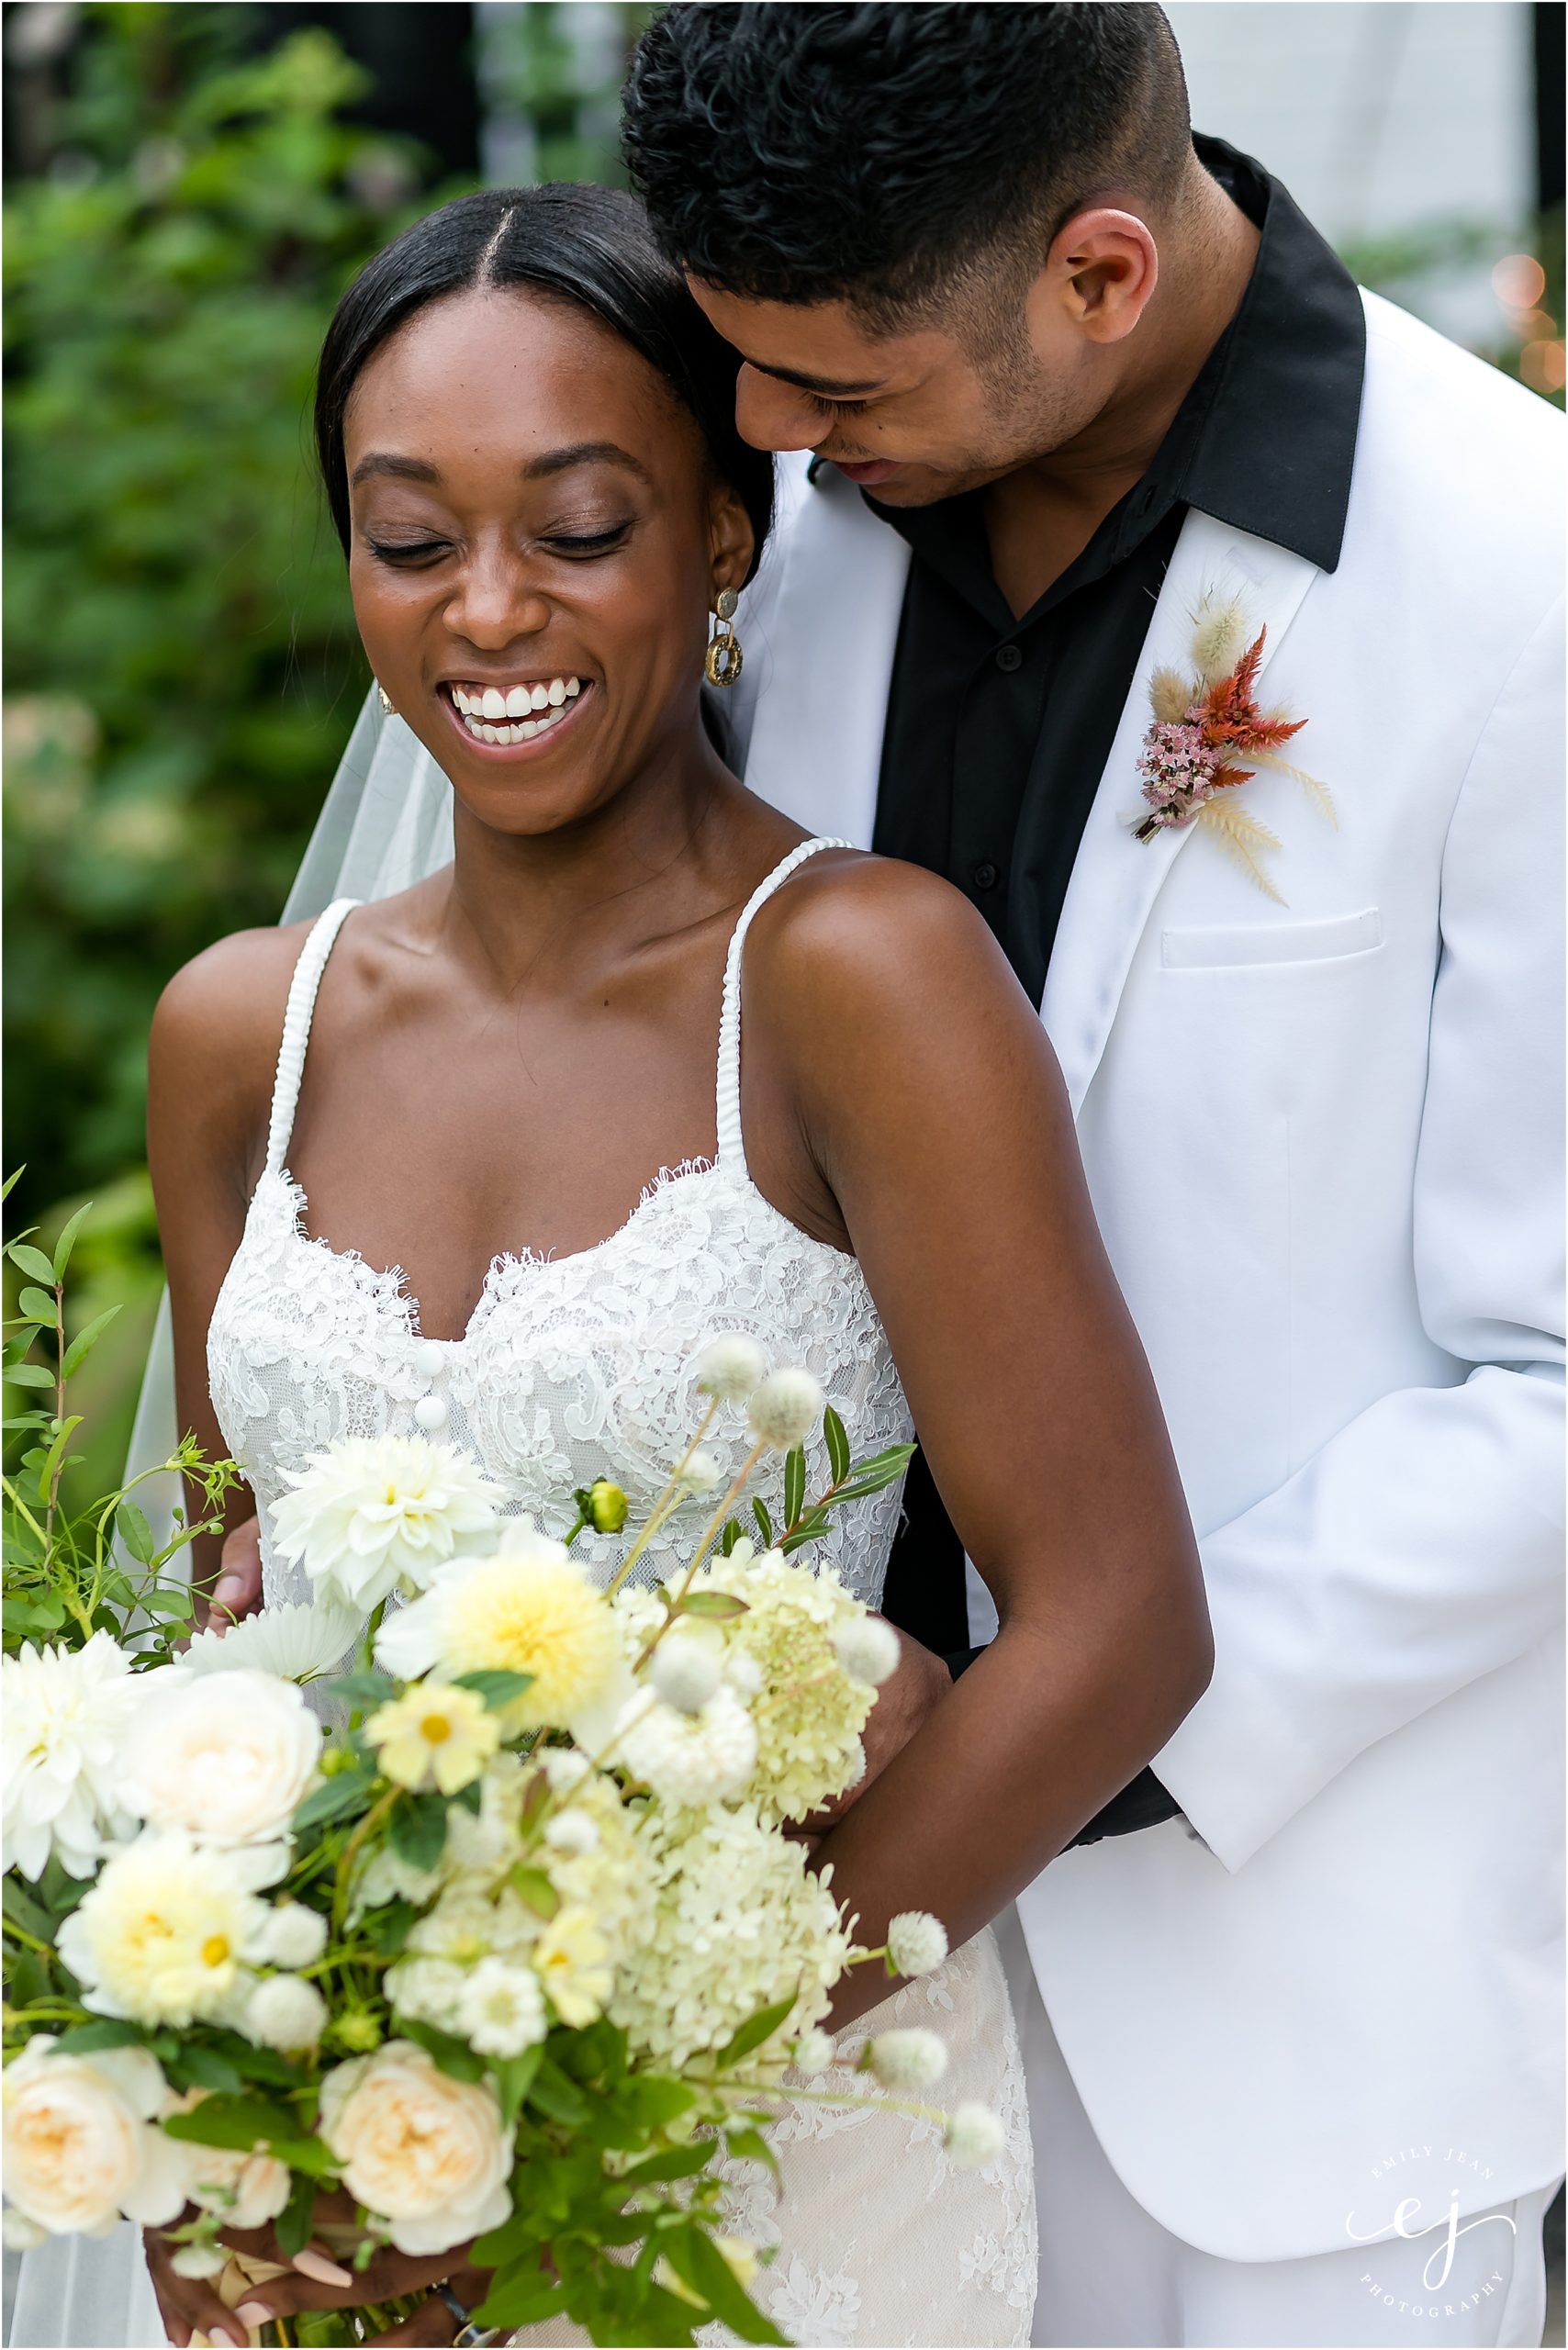 black bride and groom laughing smiling candid